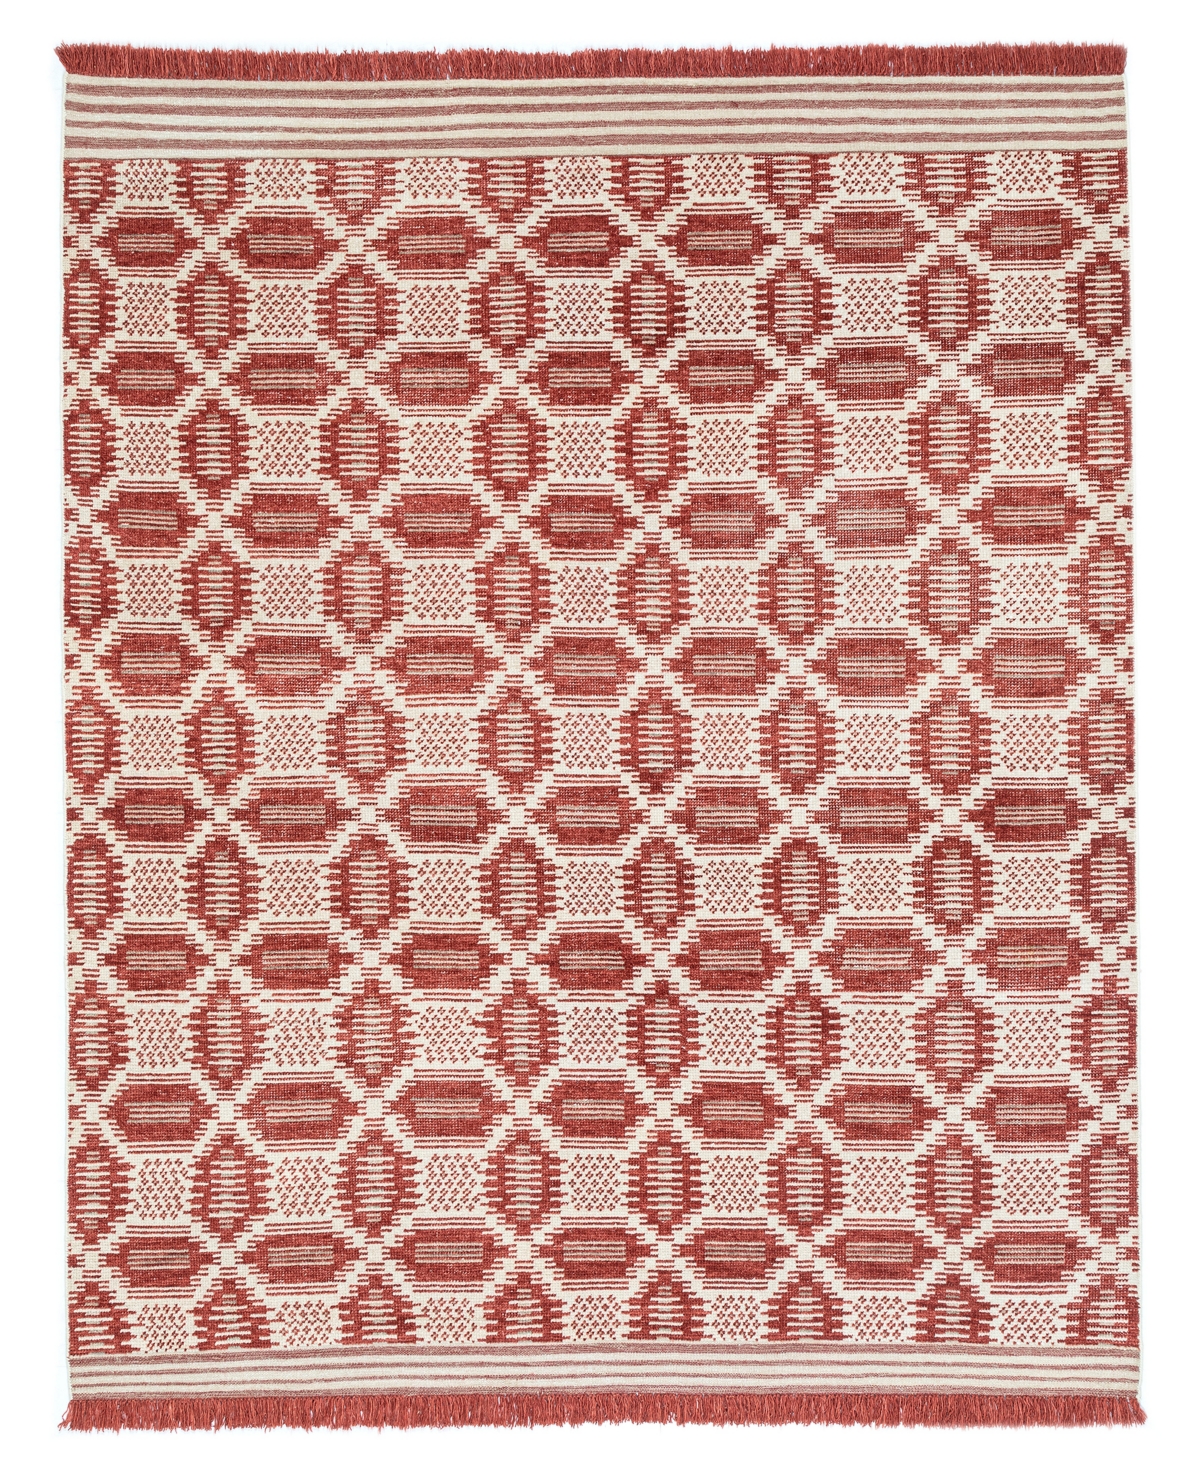 NuStory Newell Turner Lover's Knot Coverlet I 7'6in x 9'6in Area Rug - Red